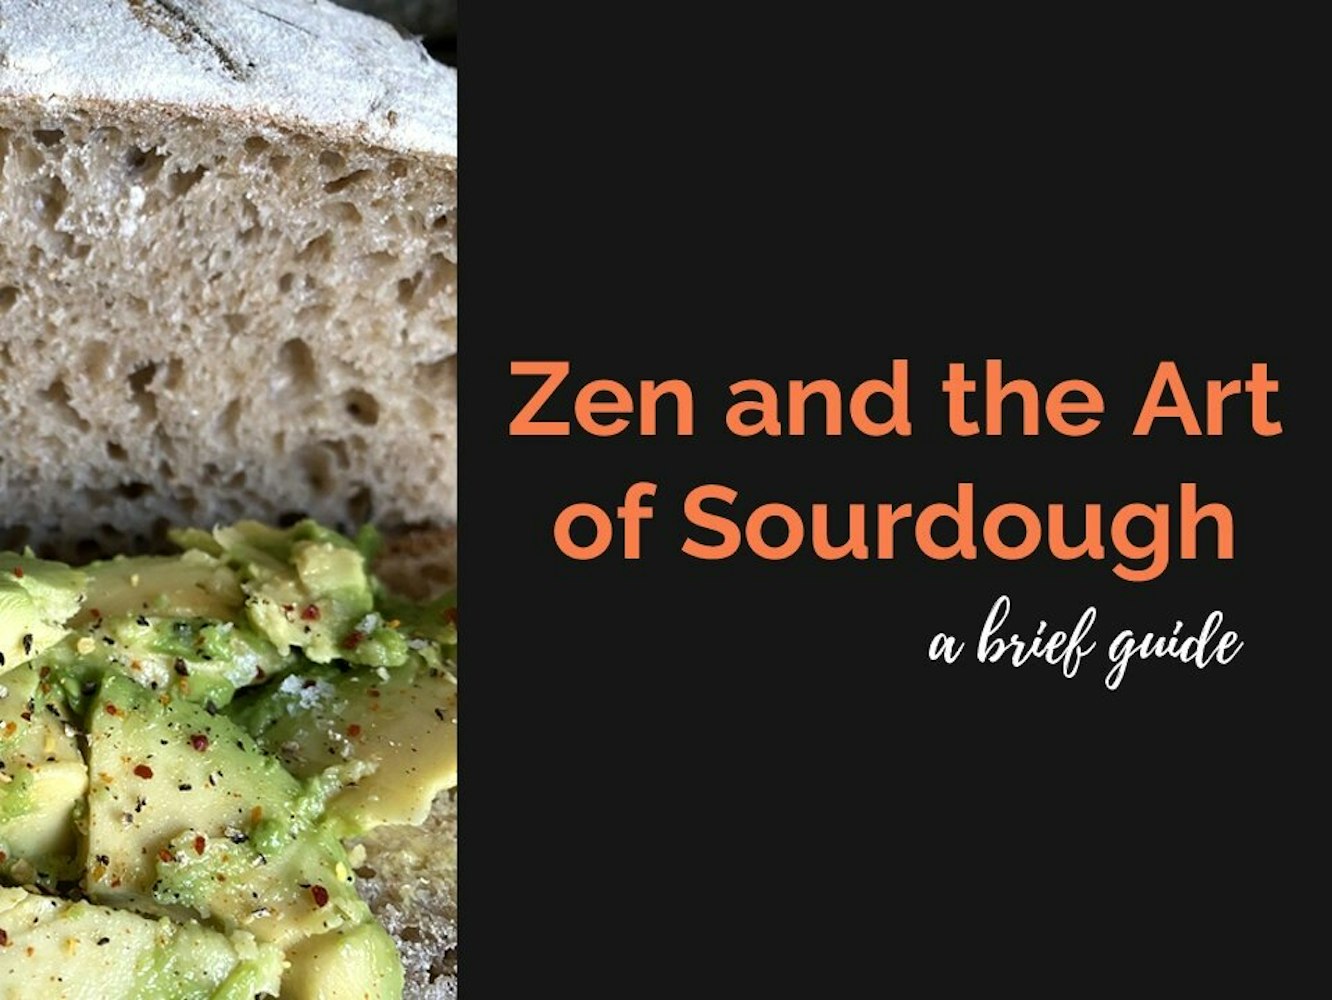 Cover Image for Video: Zen and the Art of Sourdough